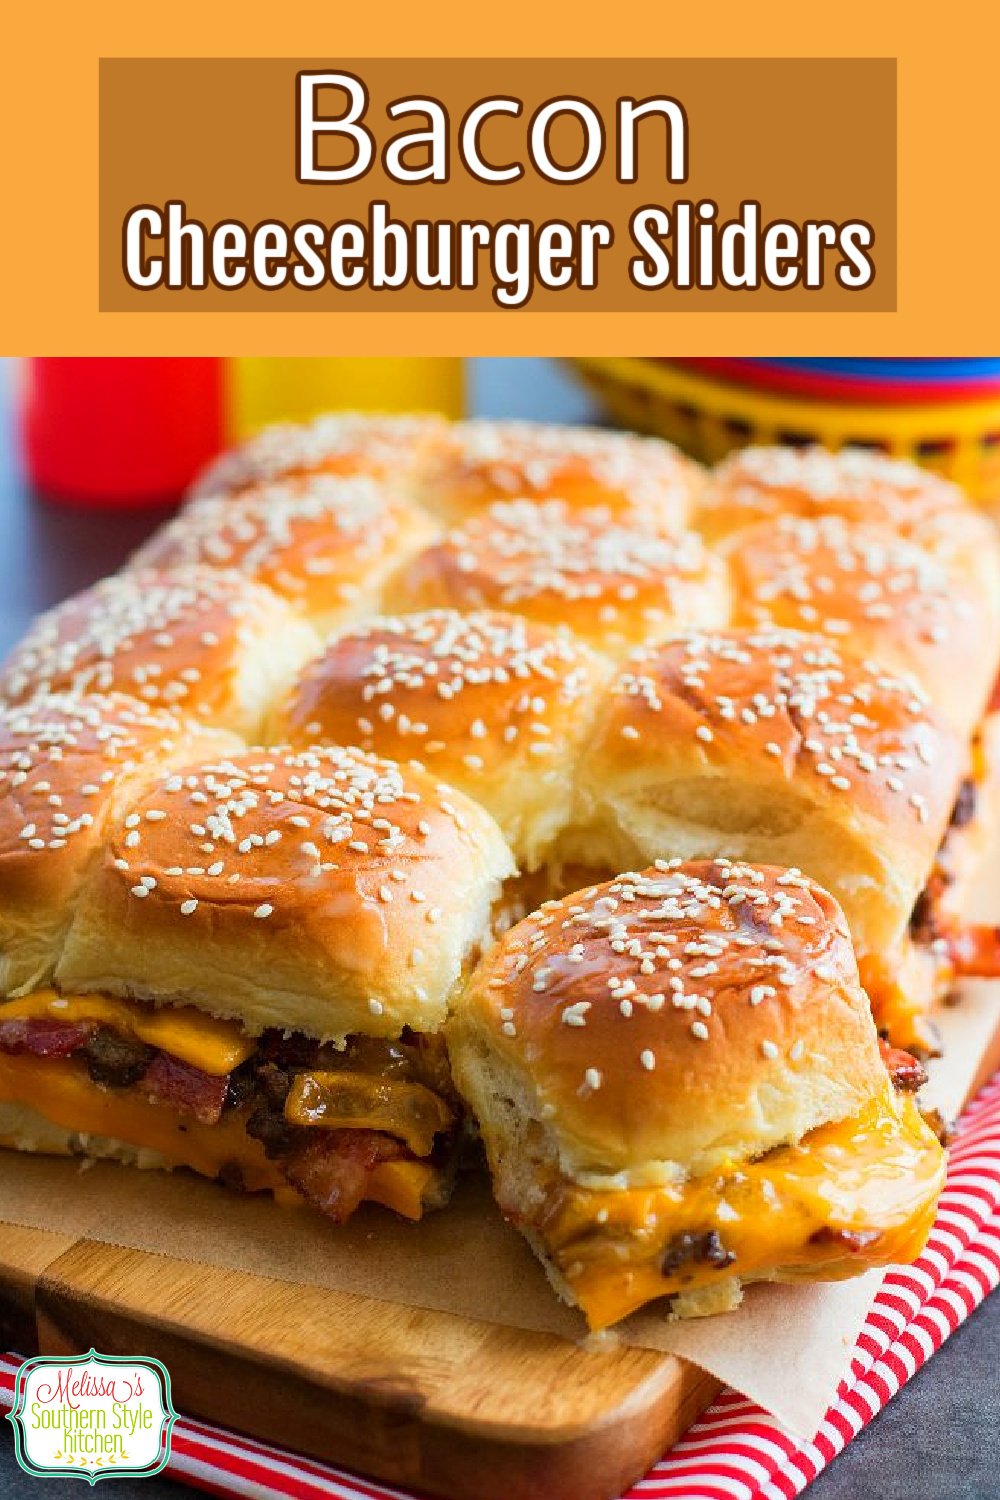 Enjoy these irresistible pull apart Bacon Cheeseburger Hawaiian Sweet Roll Sliders for snacking and casual meals #cheeburgersliders #baconcheeseburgers #cheeseburgers #sliderrecipes #Hawaiiansweetrolls #pullapartrolls #sweetrolls #dinnerideas #tailgating #dinner #southernrecipes #southernfood #easygroundbeefrecipes #dinner